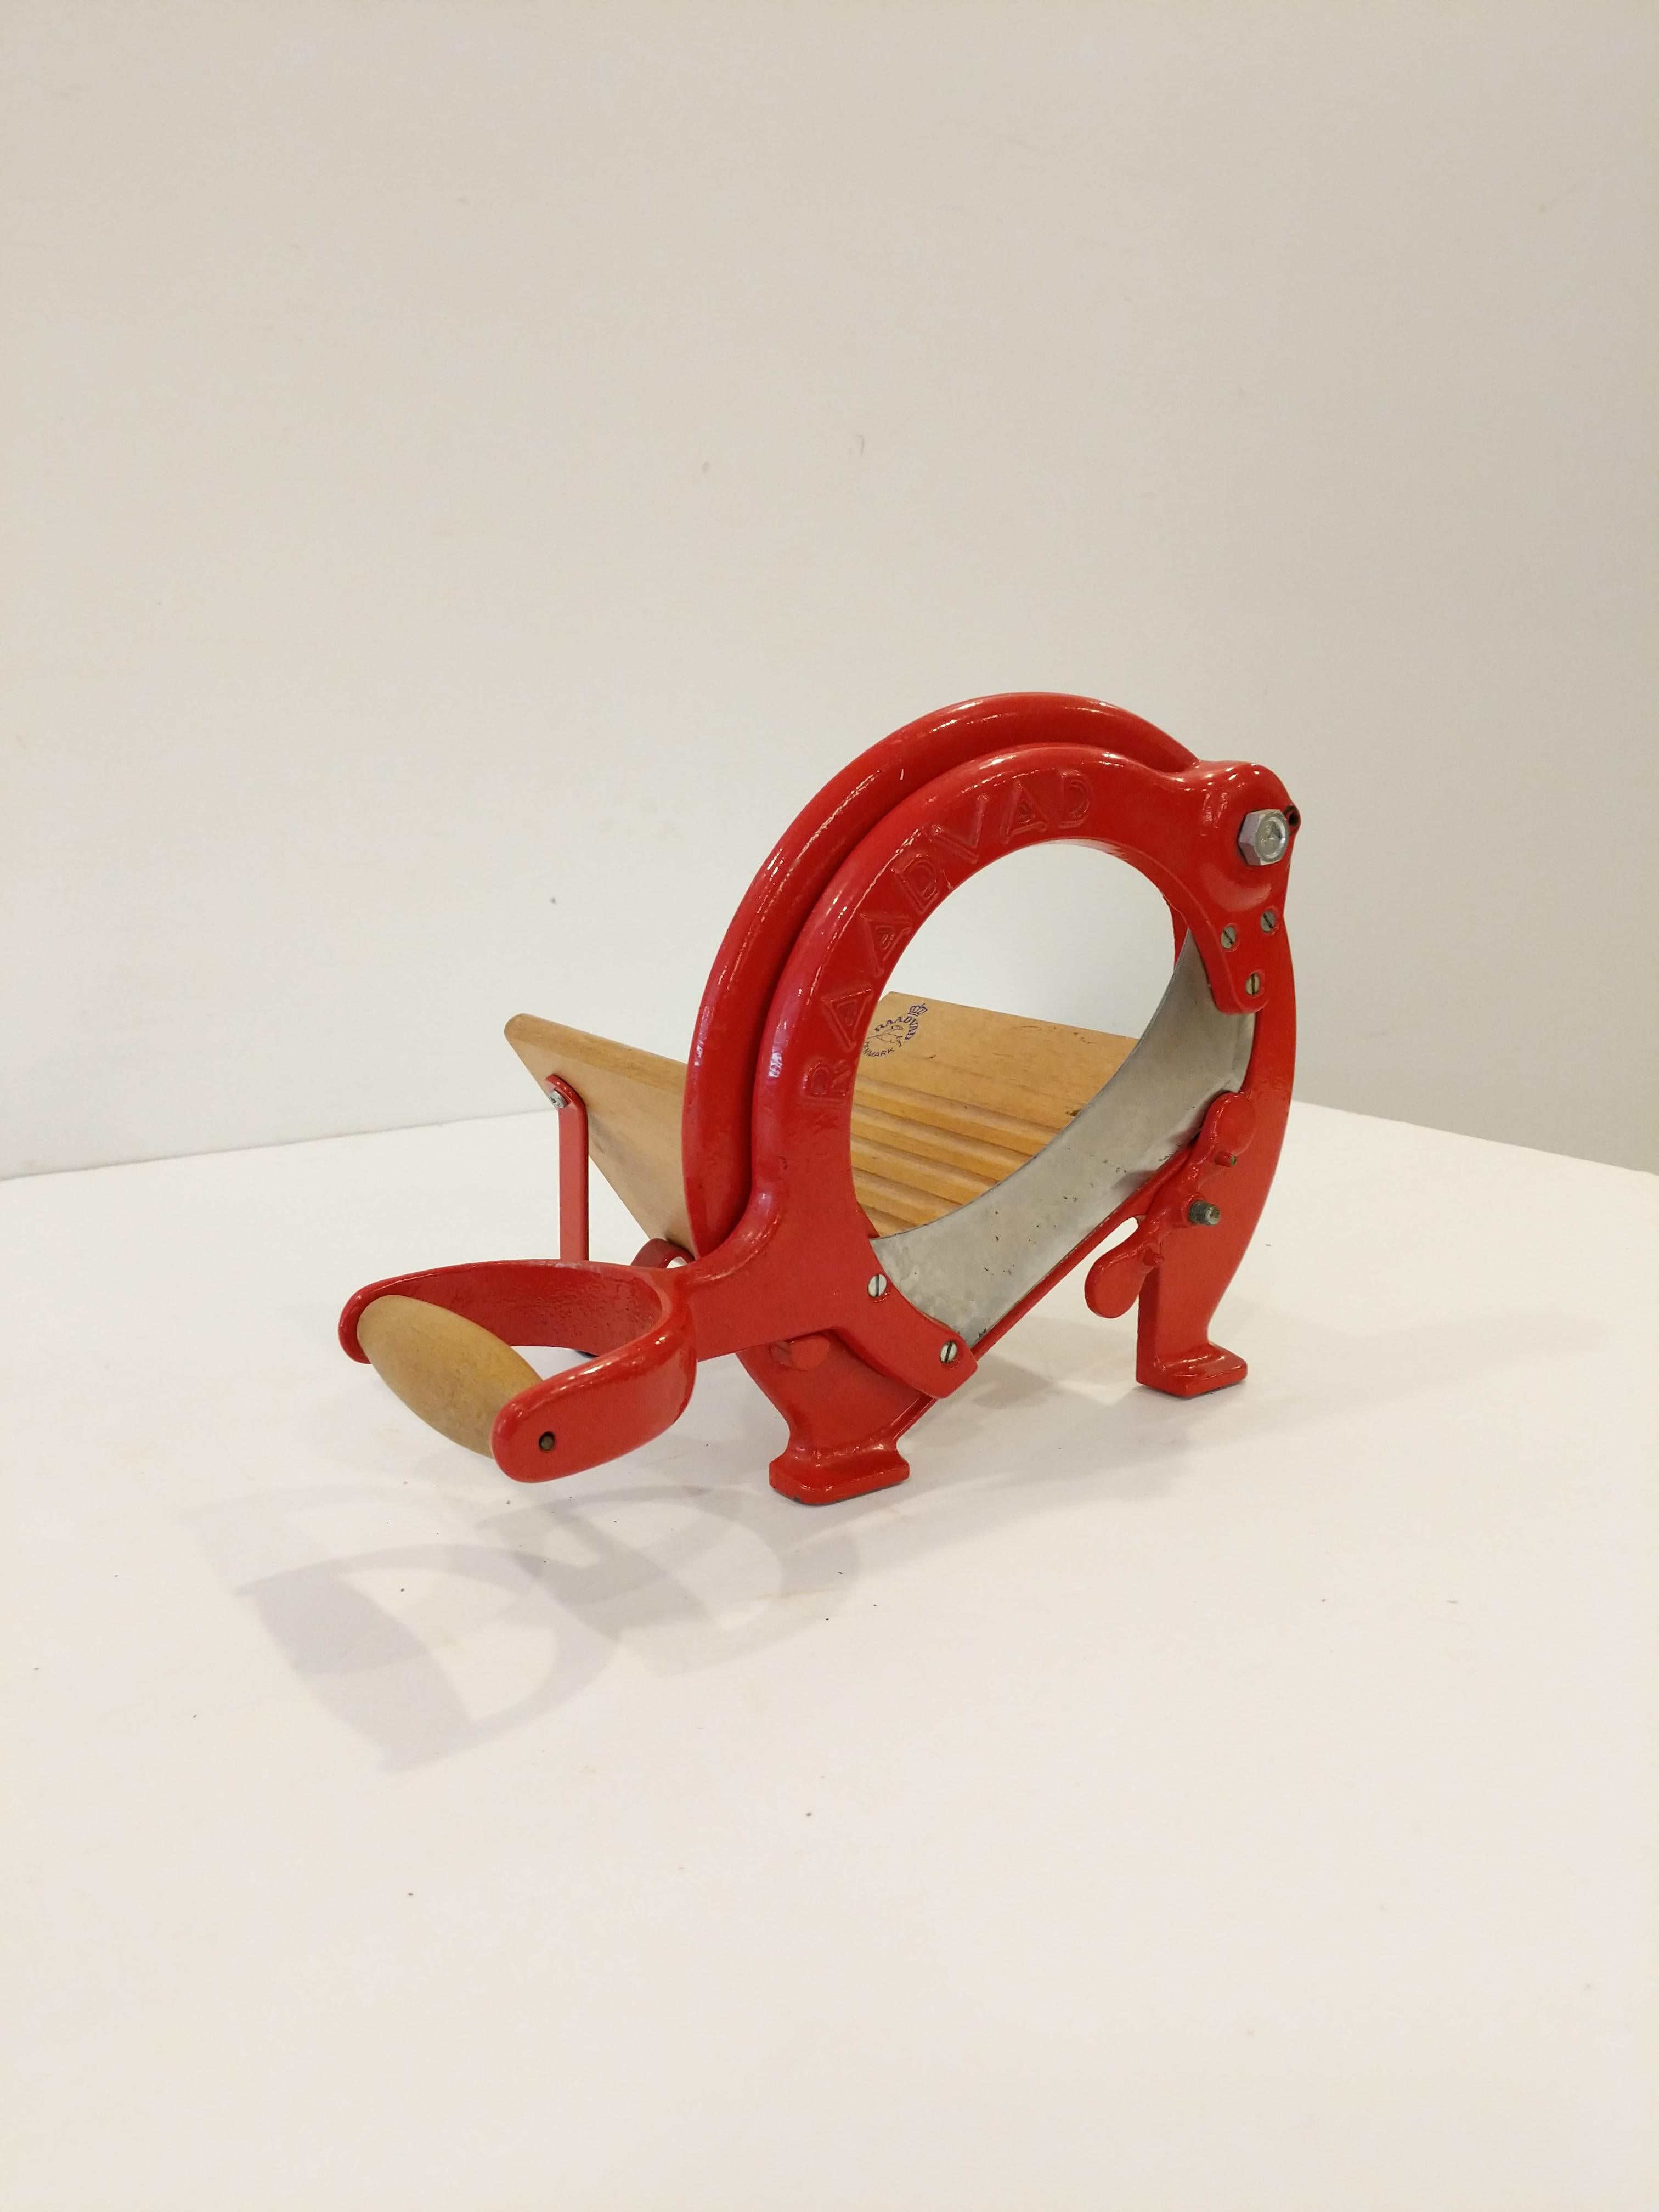 Authentic vintage Danish bread slicer / guillotine in red.

Model 294 by Raadvad.

This slicer is in good condition overall and expectedly shows its age a bit.

Dimensions:
13.5” Long including handle
9.5” Tall
8” Wide

Ref: RV27-023